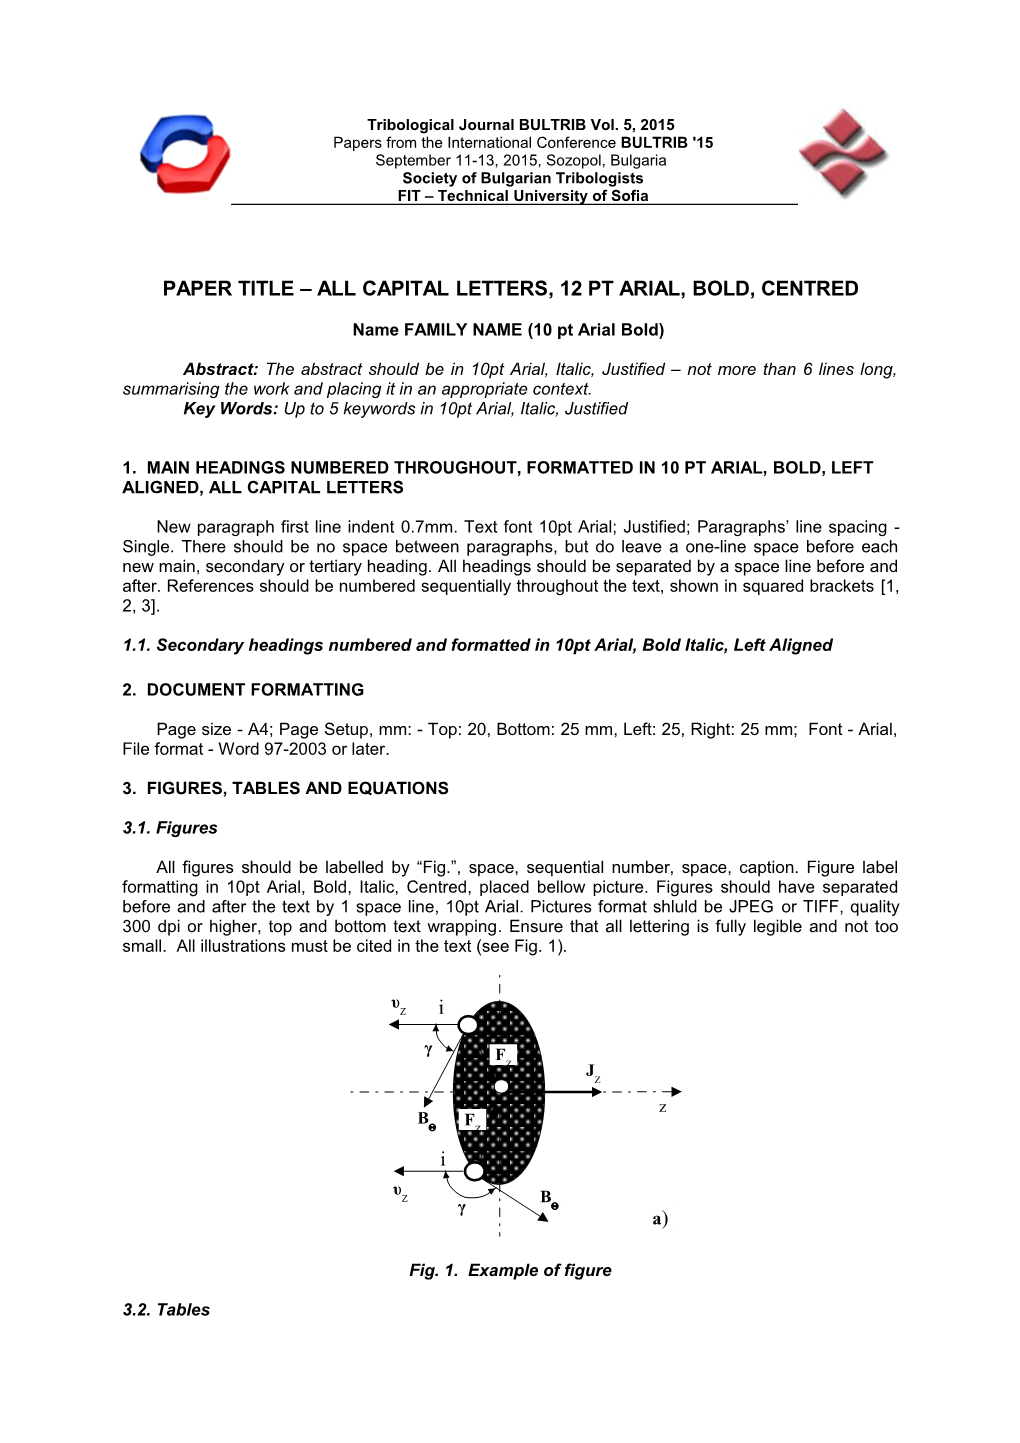 Paper Title All Capital Letters, 12 Pt Arial, Bold, Centred